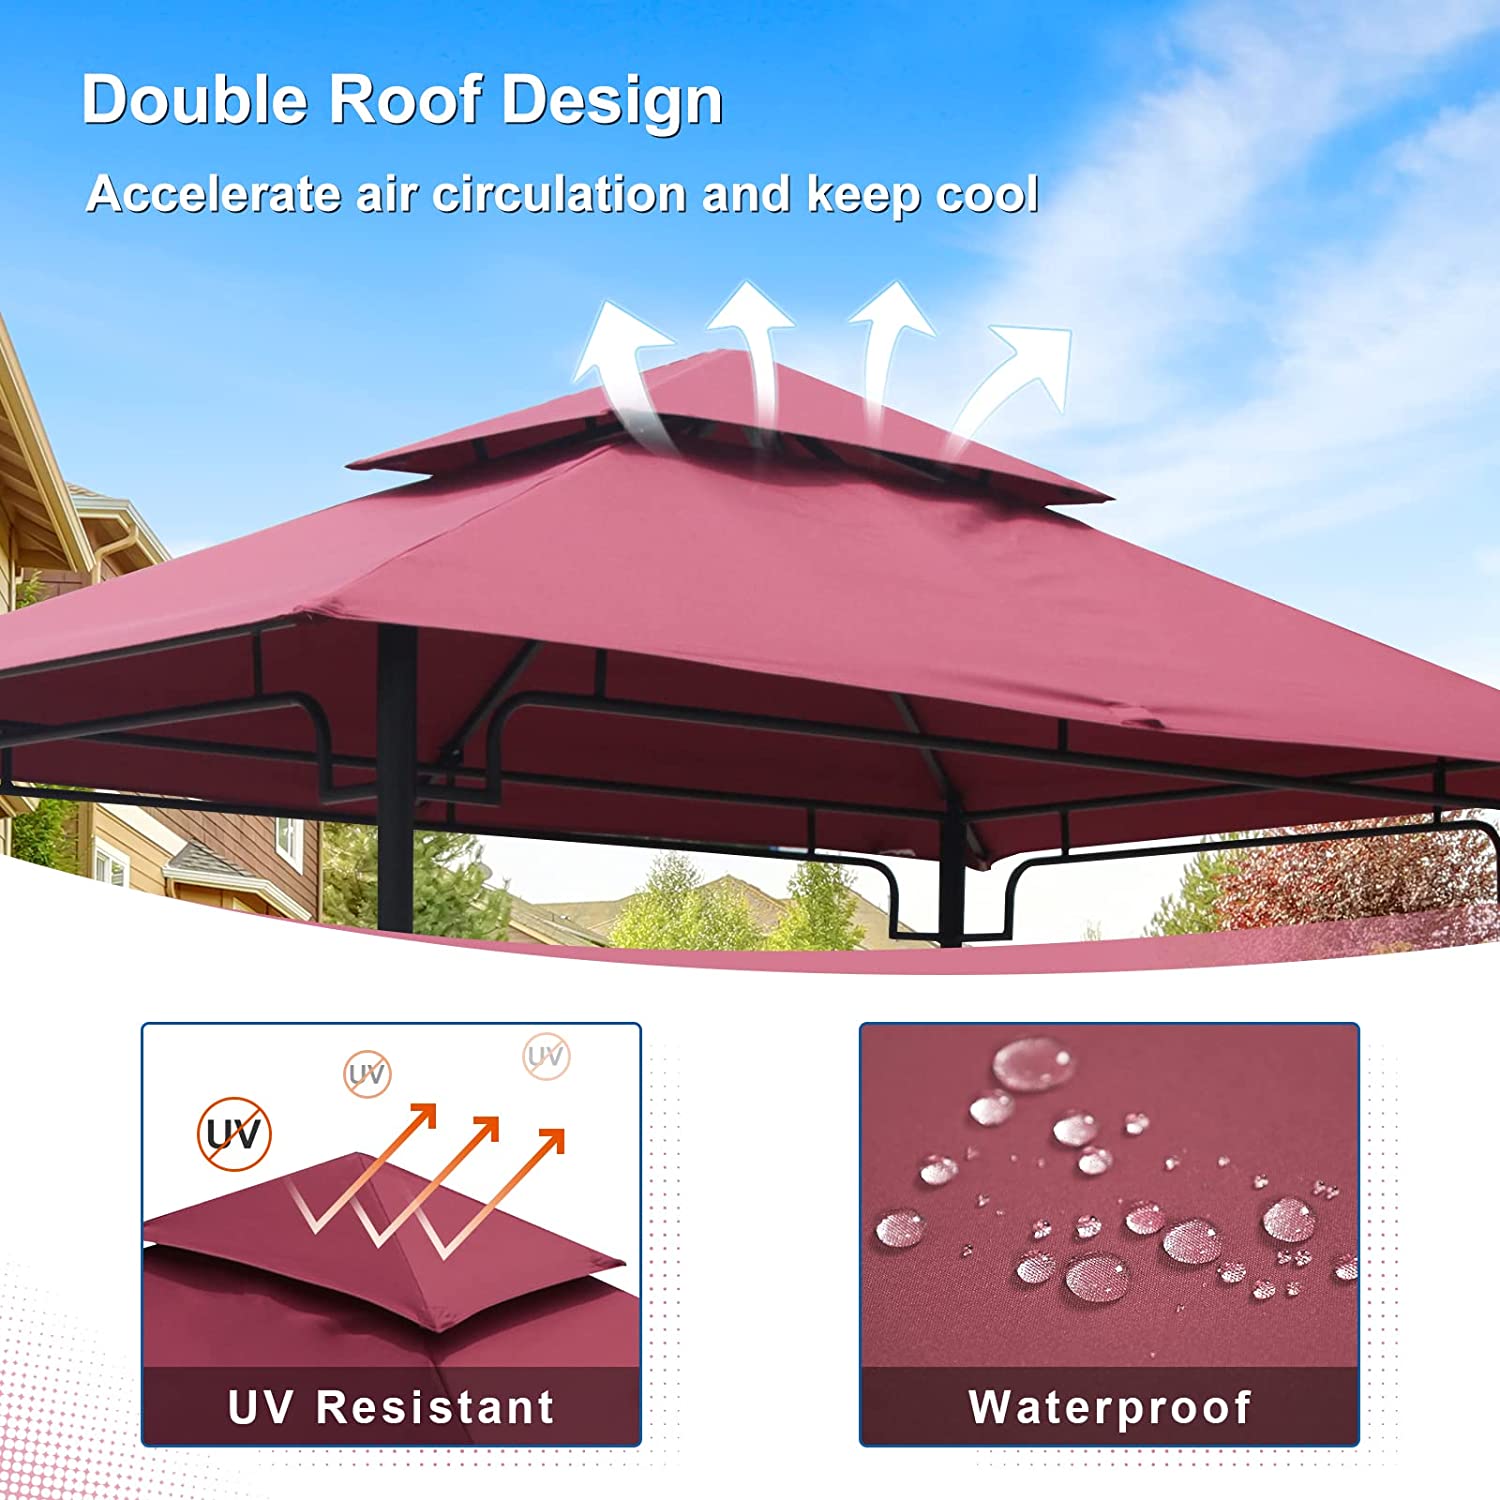 Grill Gazebo 8 x 5 Double Tiered Outdoor BBQ Grill Patio Canopy, Backyard Barbeque Tent with Extra Shelves, Red